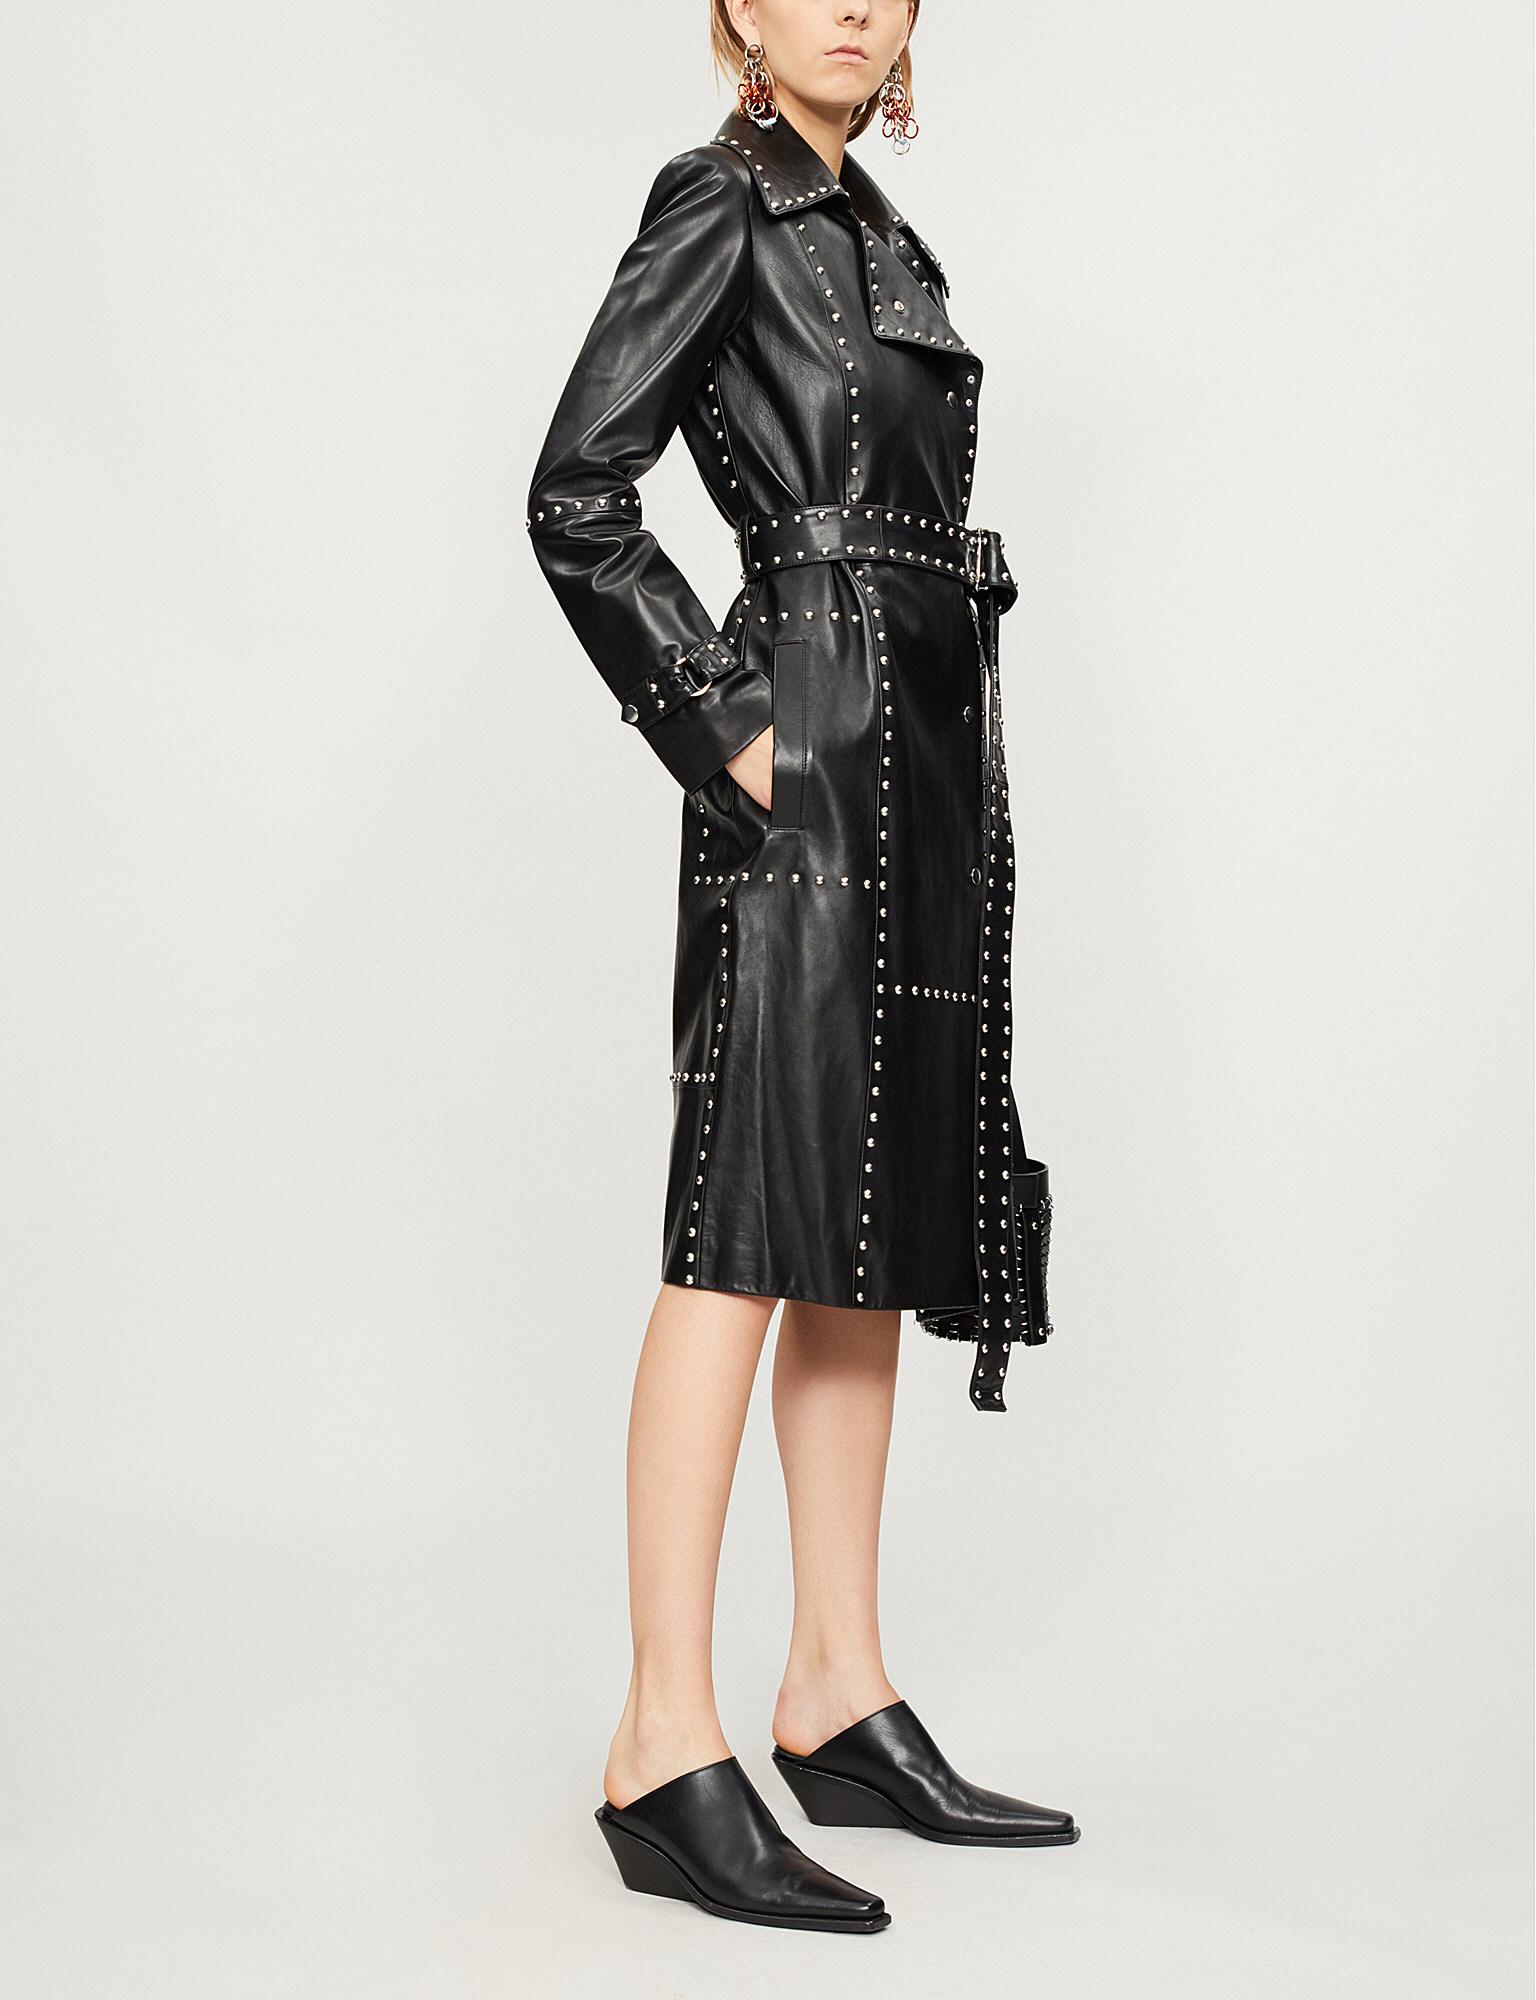 Helmut Lang Studded Leather Trench Coat in Black | Lyst